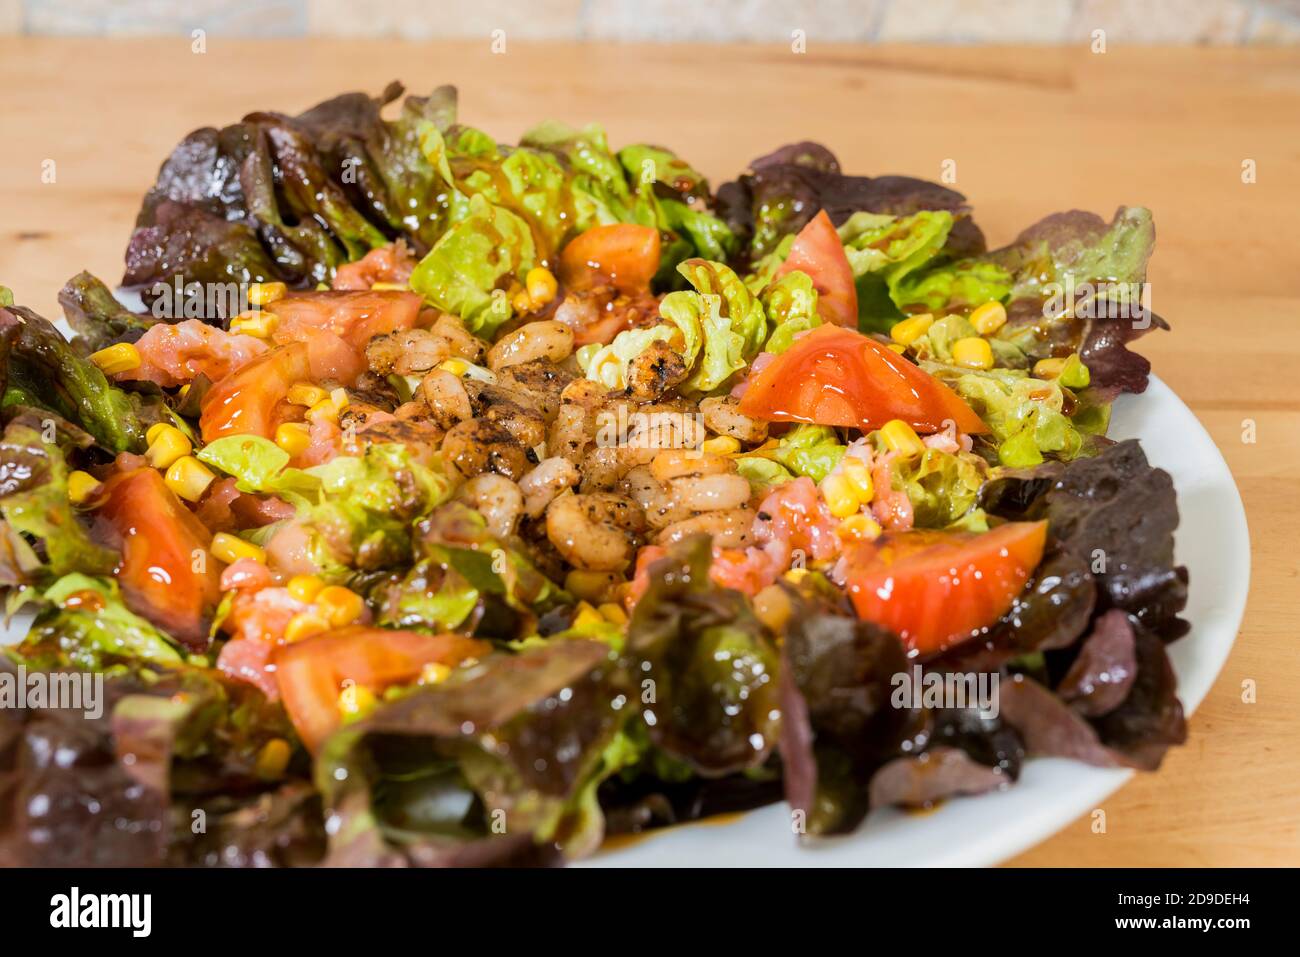 salad with nuts Stock Photo